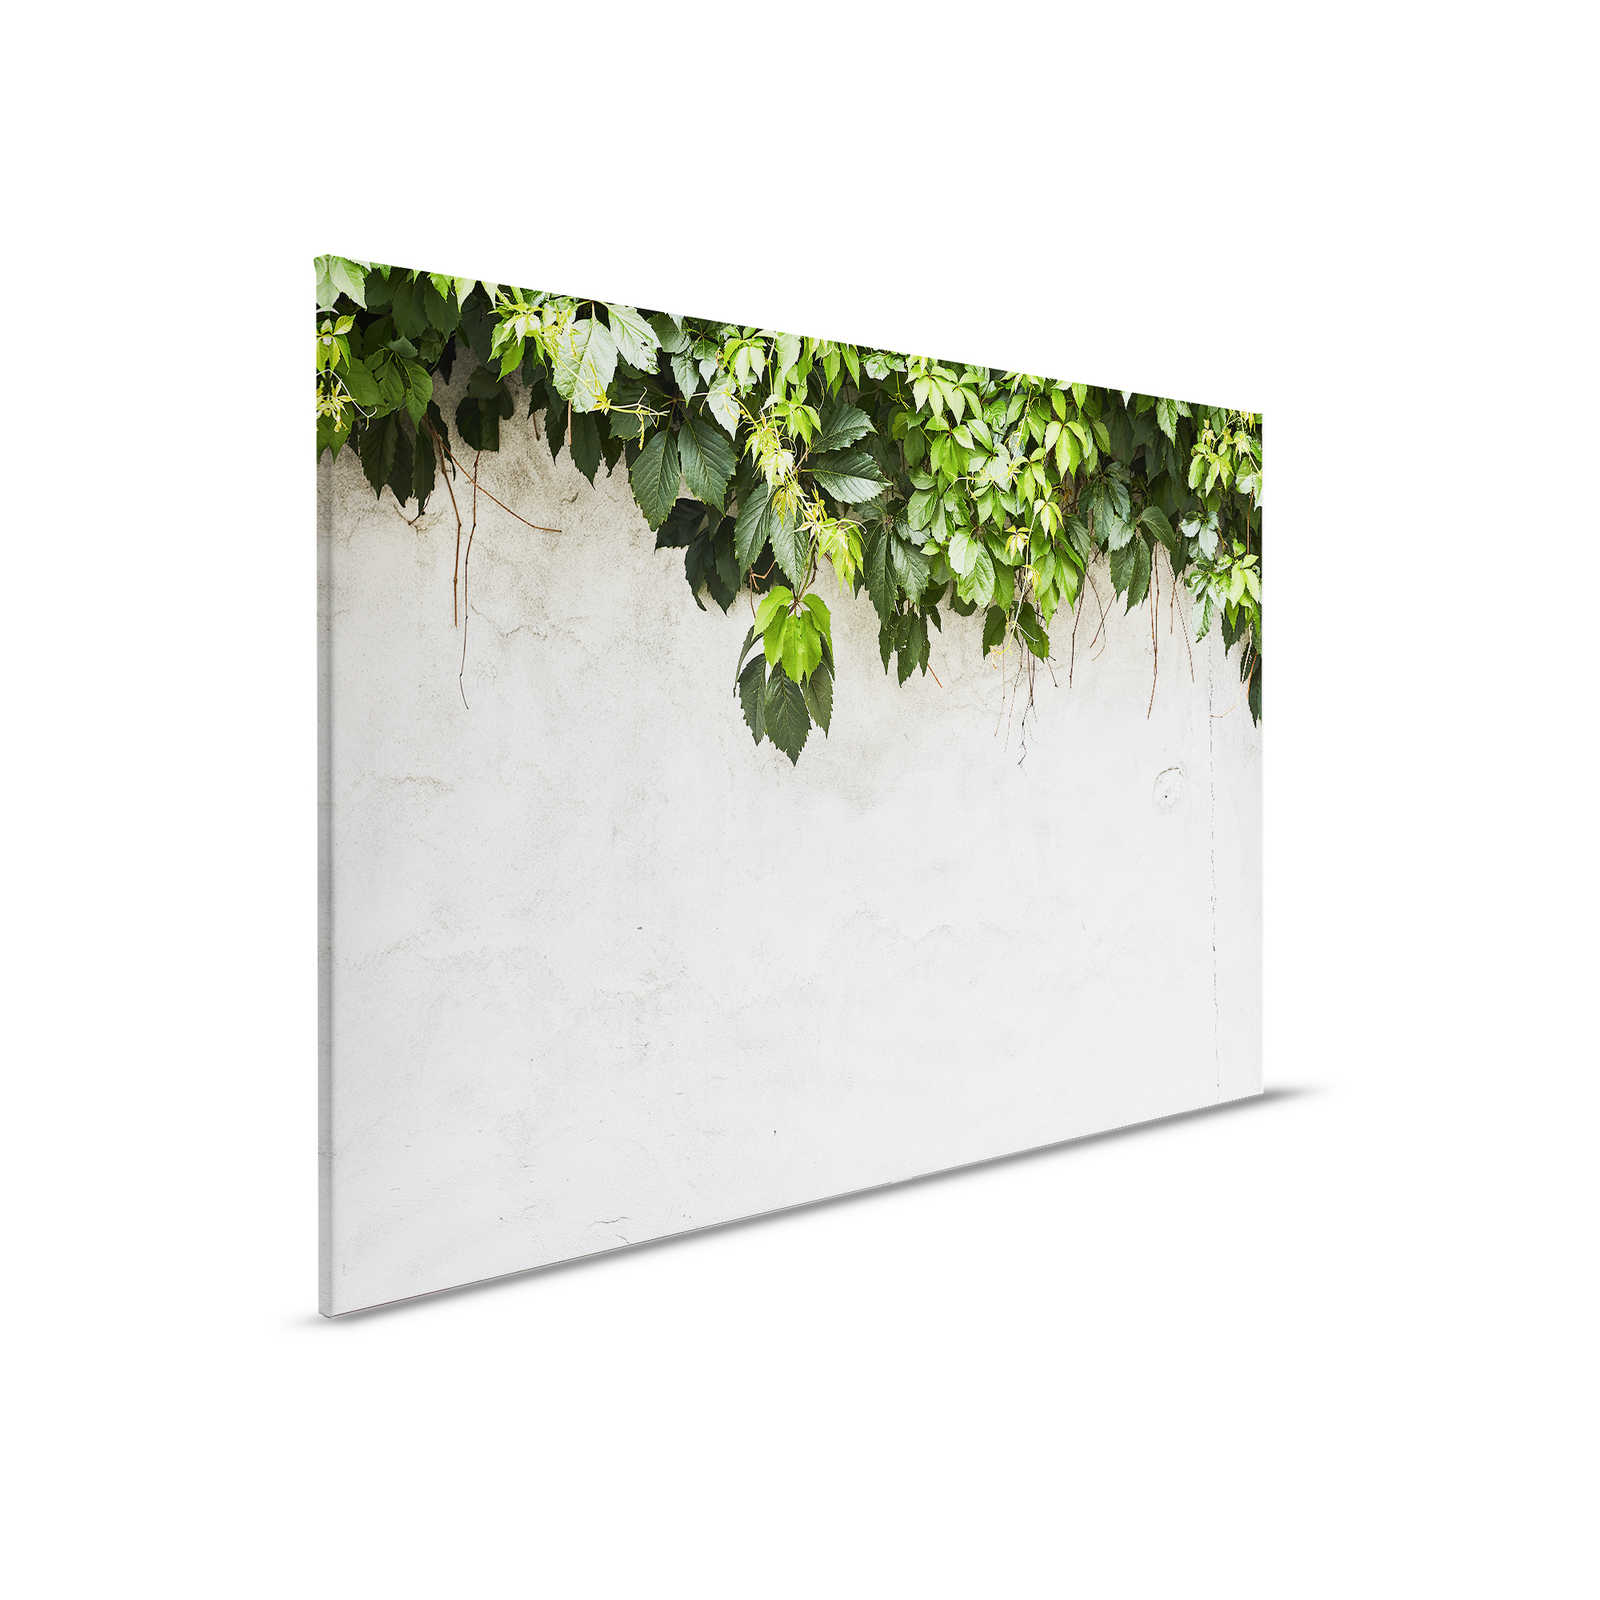         Canvas painting Leaves tendrils in front of concrete wall - 0,90 m x 0,60 m
    